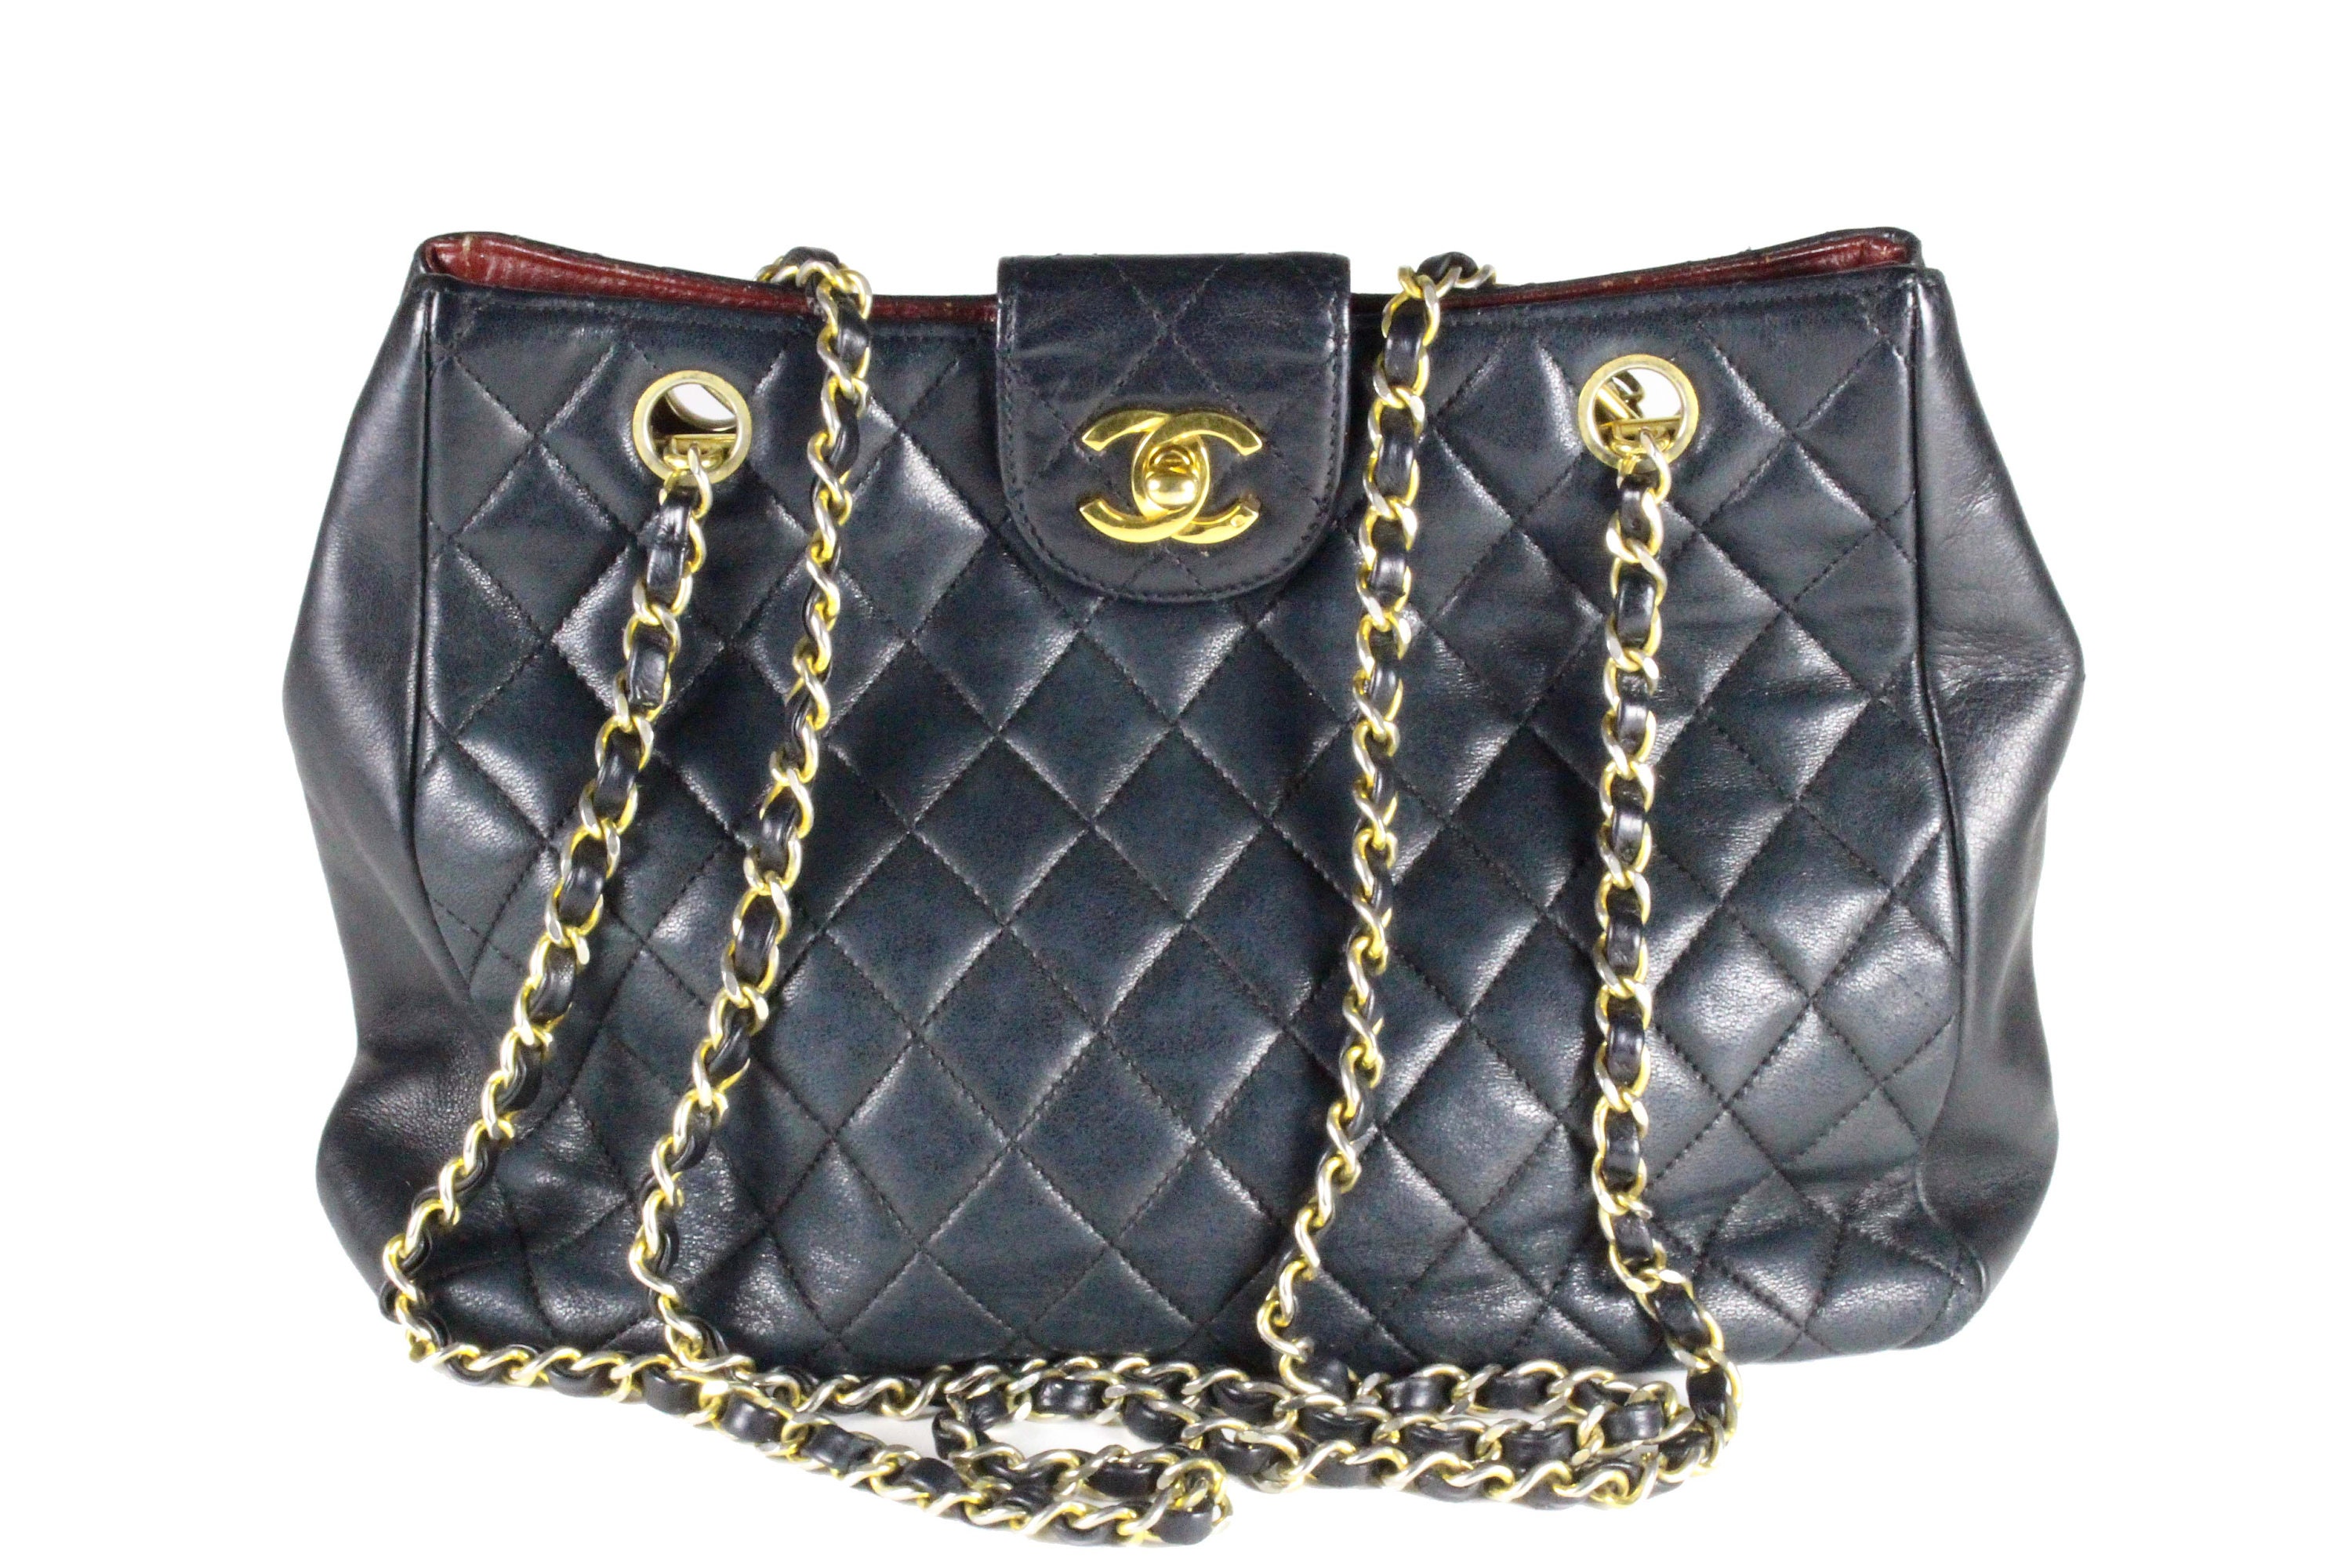 CHANEL Vintage 1990's Quilted Leather Tote Bag -  Norway